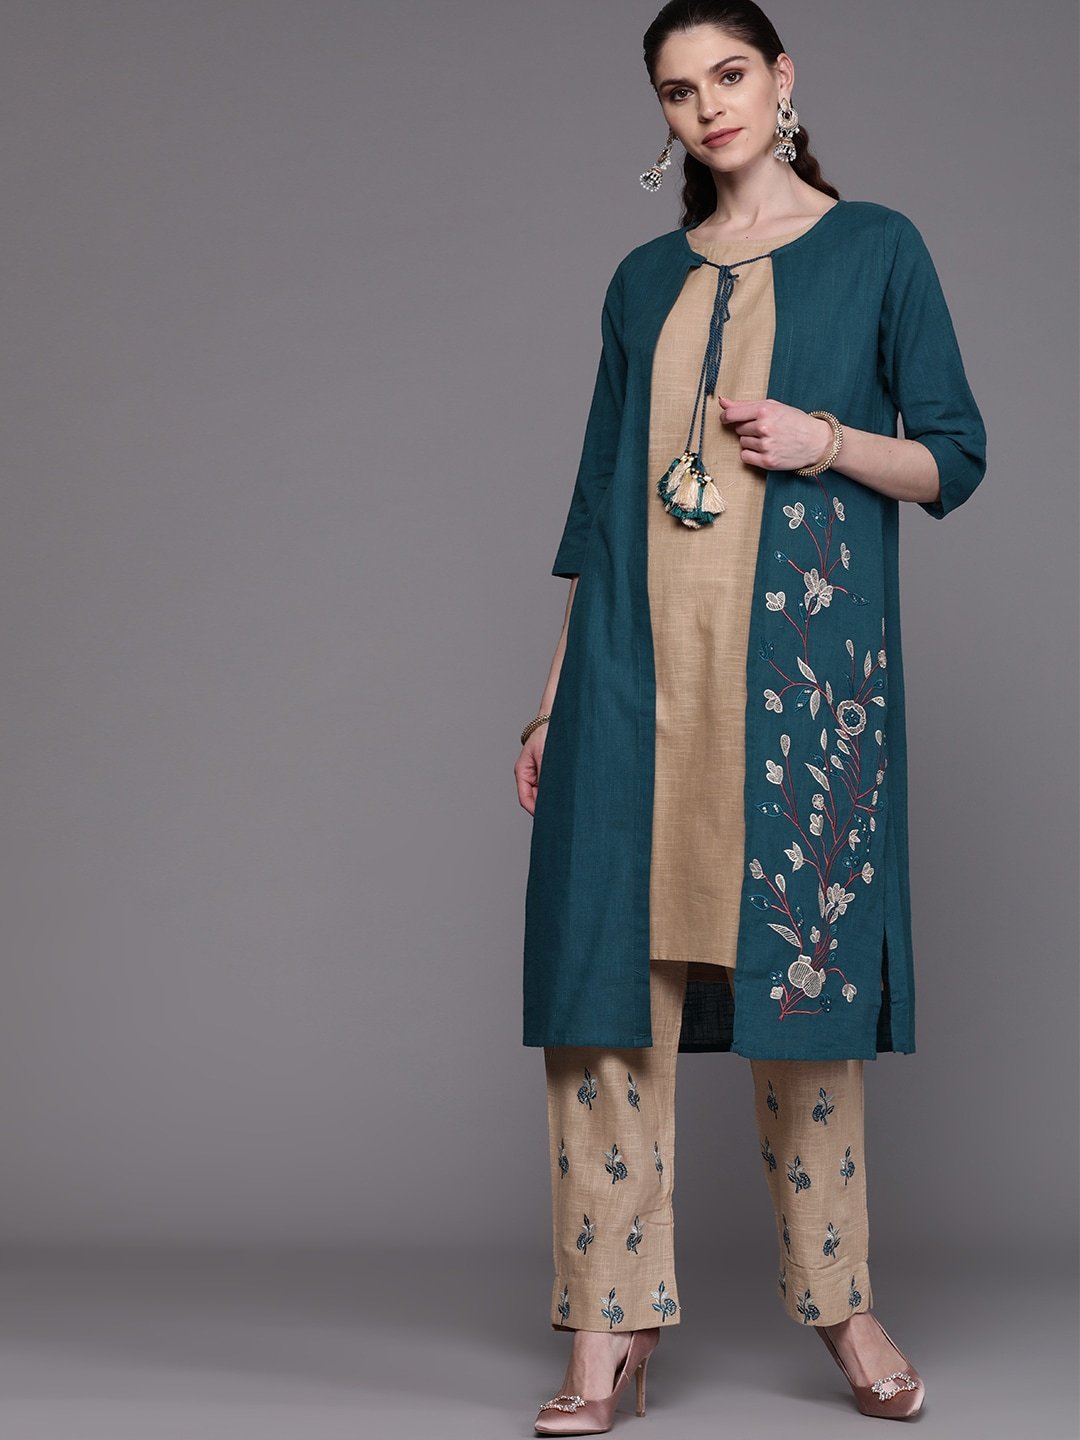 Women's  Teal Blue & Brown Embroidered Layered Kurta with Palazzos - AKS